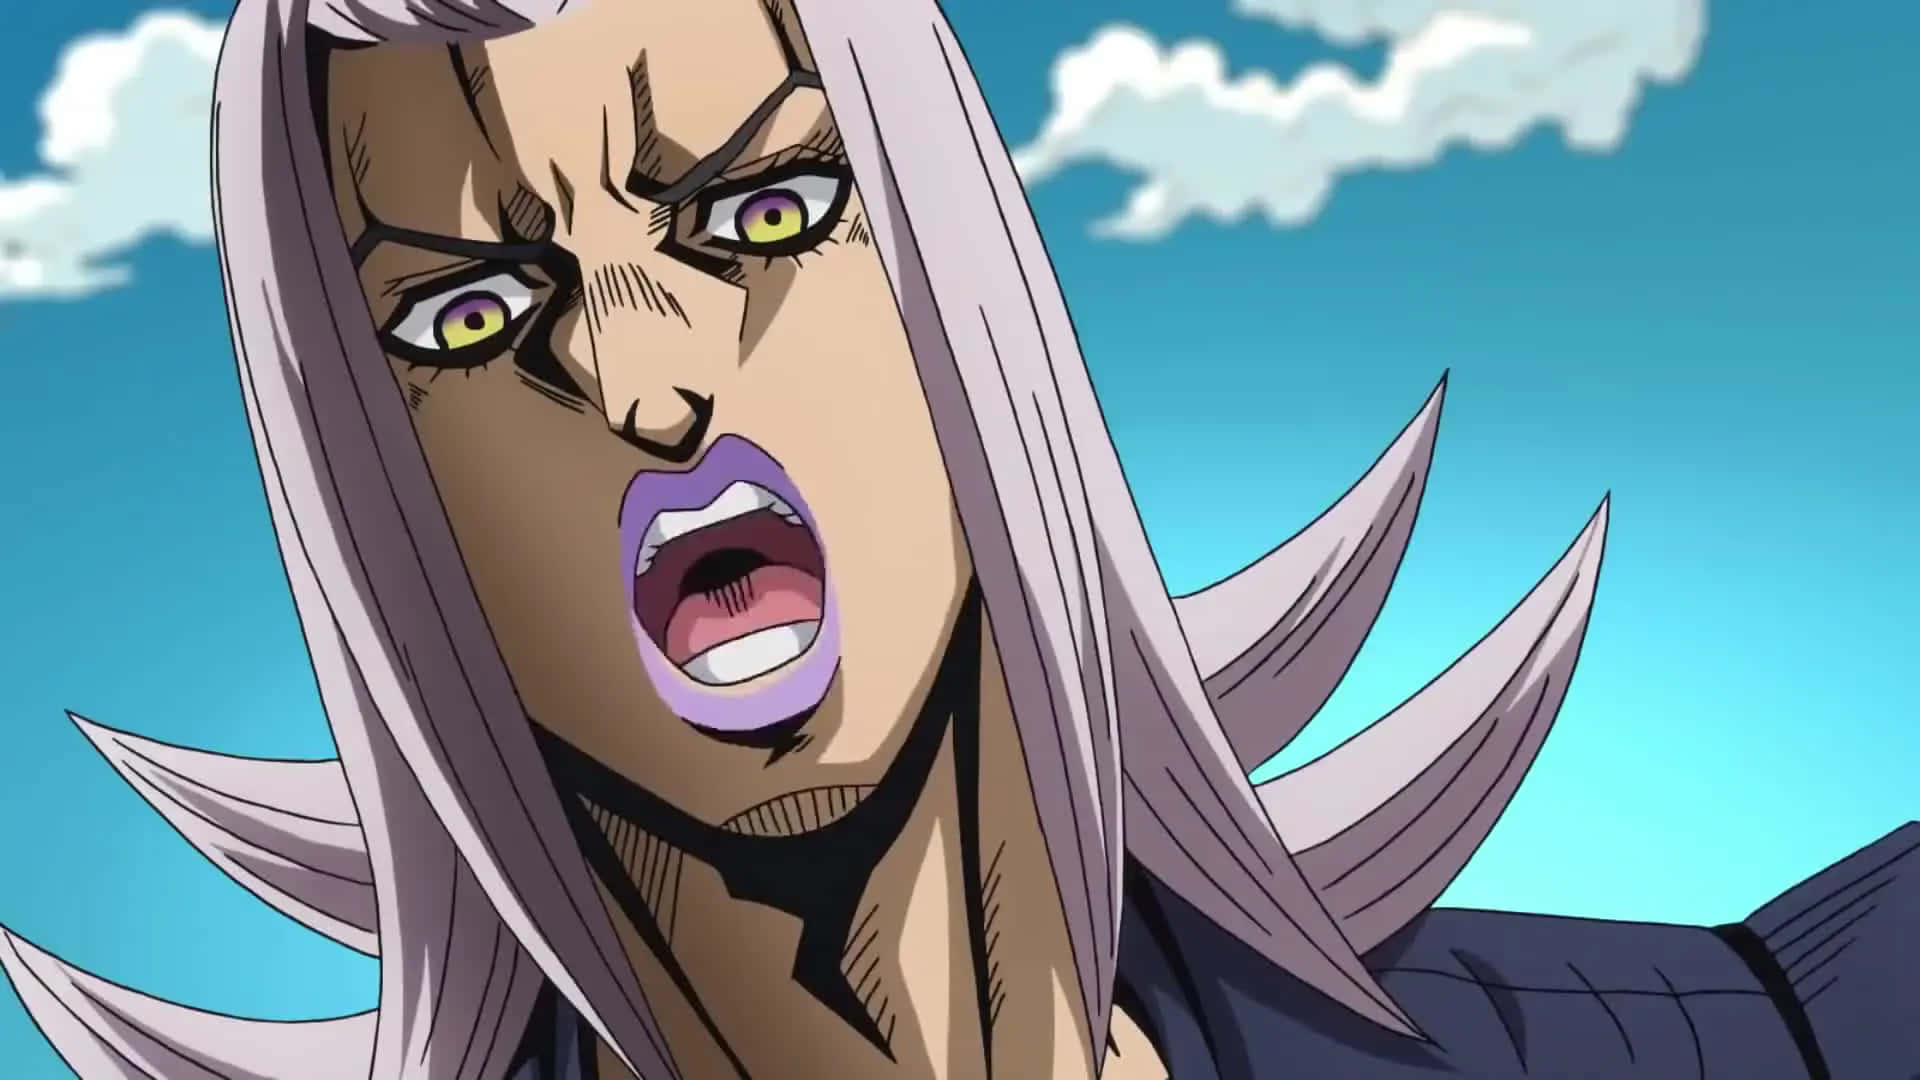 Vento Aureo Anime Characters in Action Wallpaper